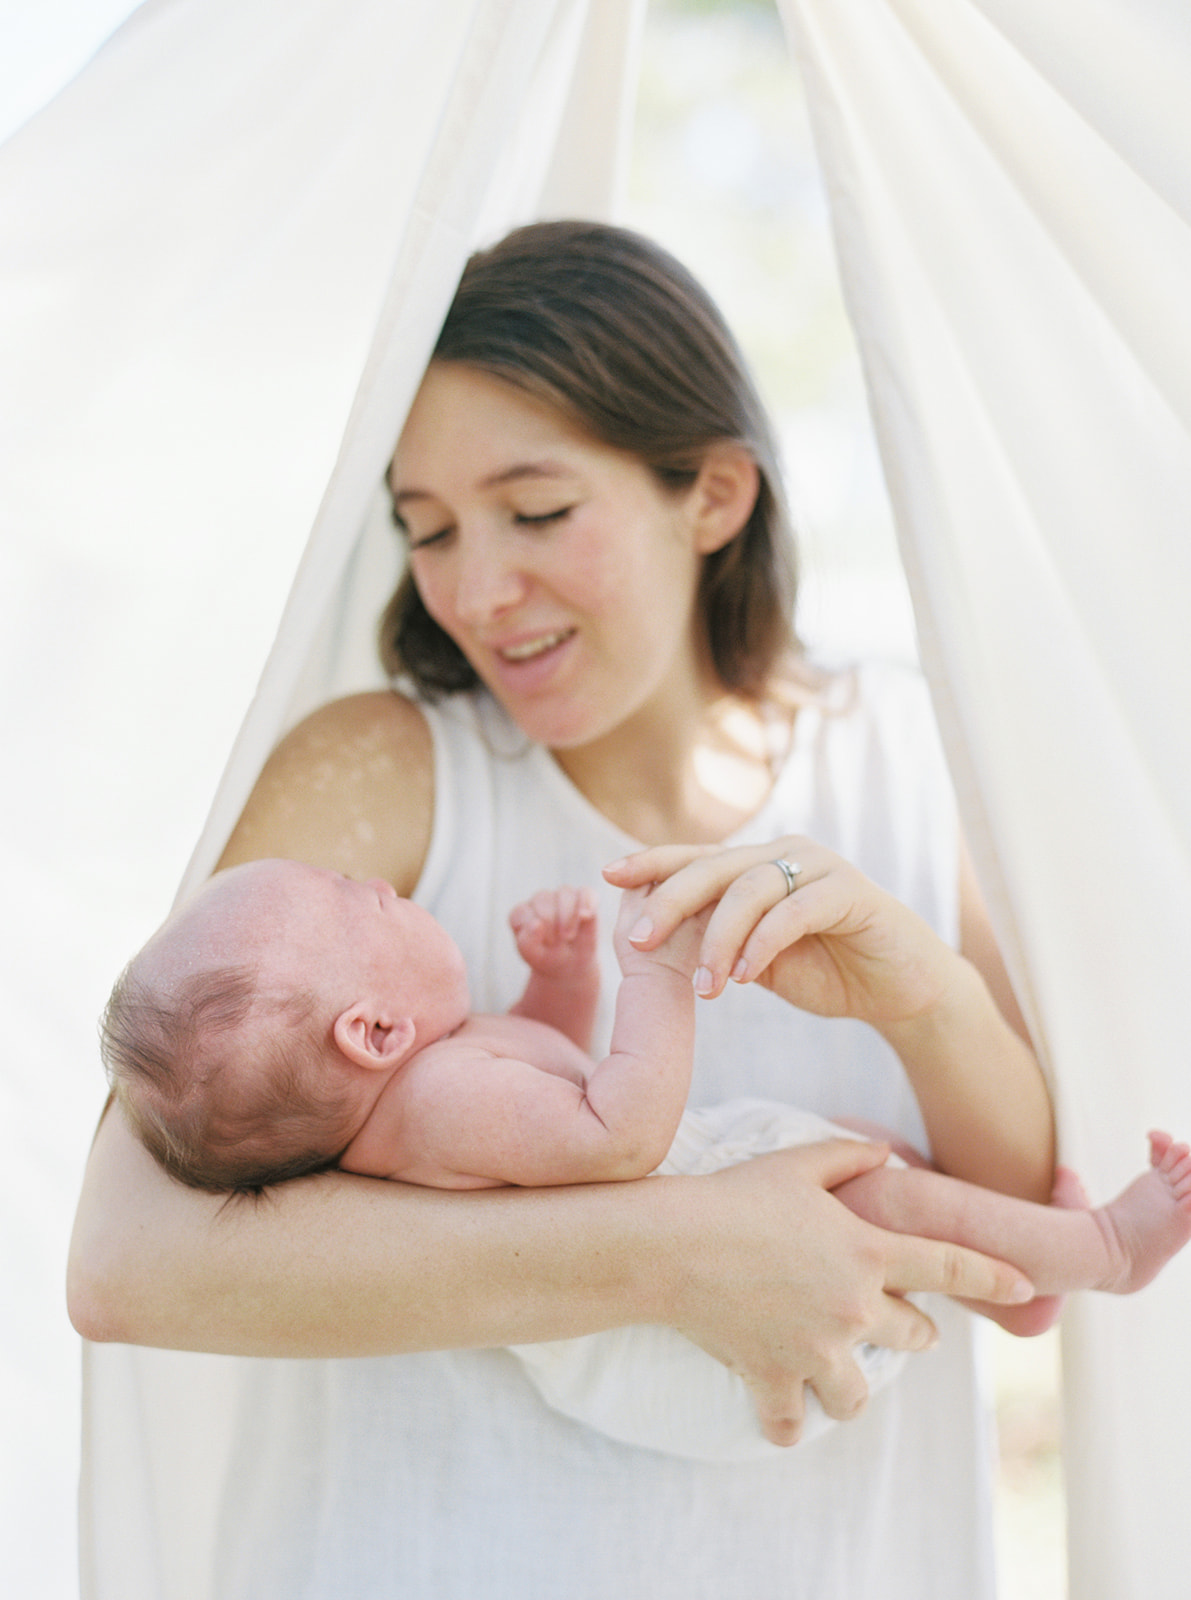 Mom holds baby's hand in front of organic sheets during newborn portraits.